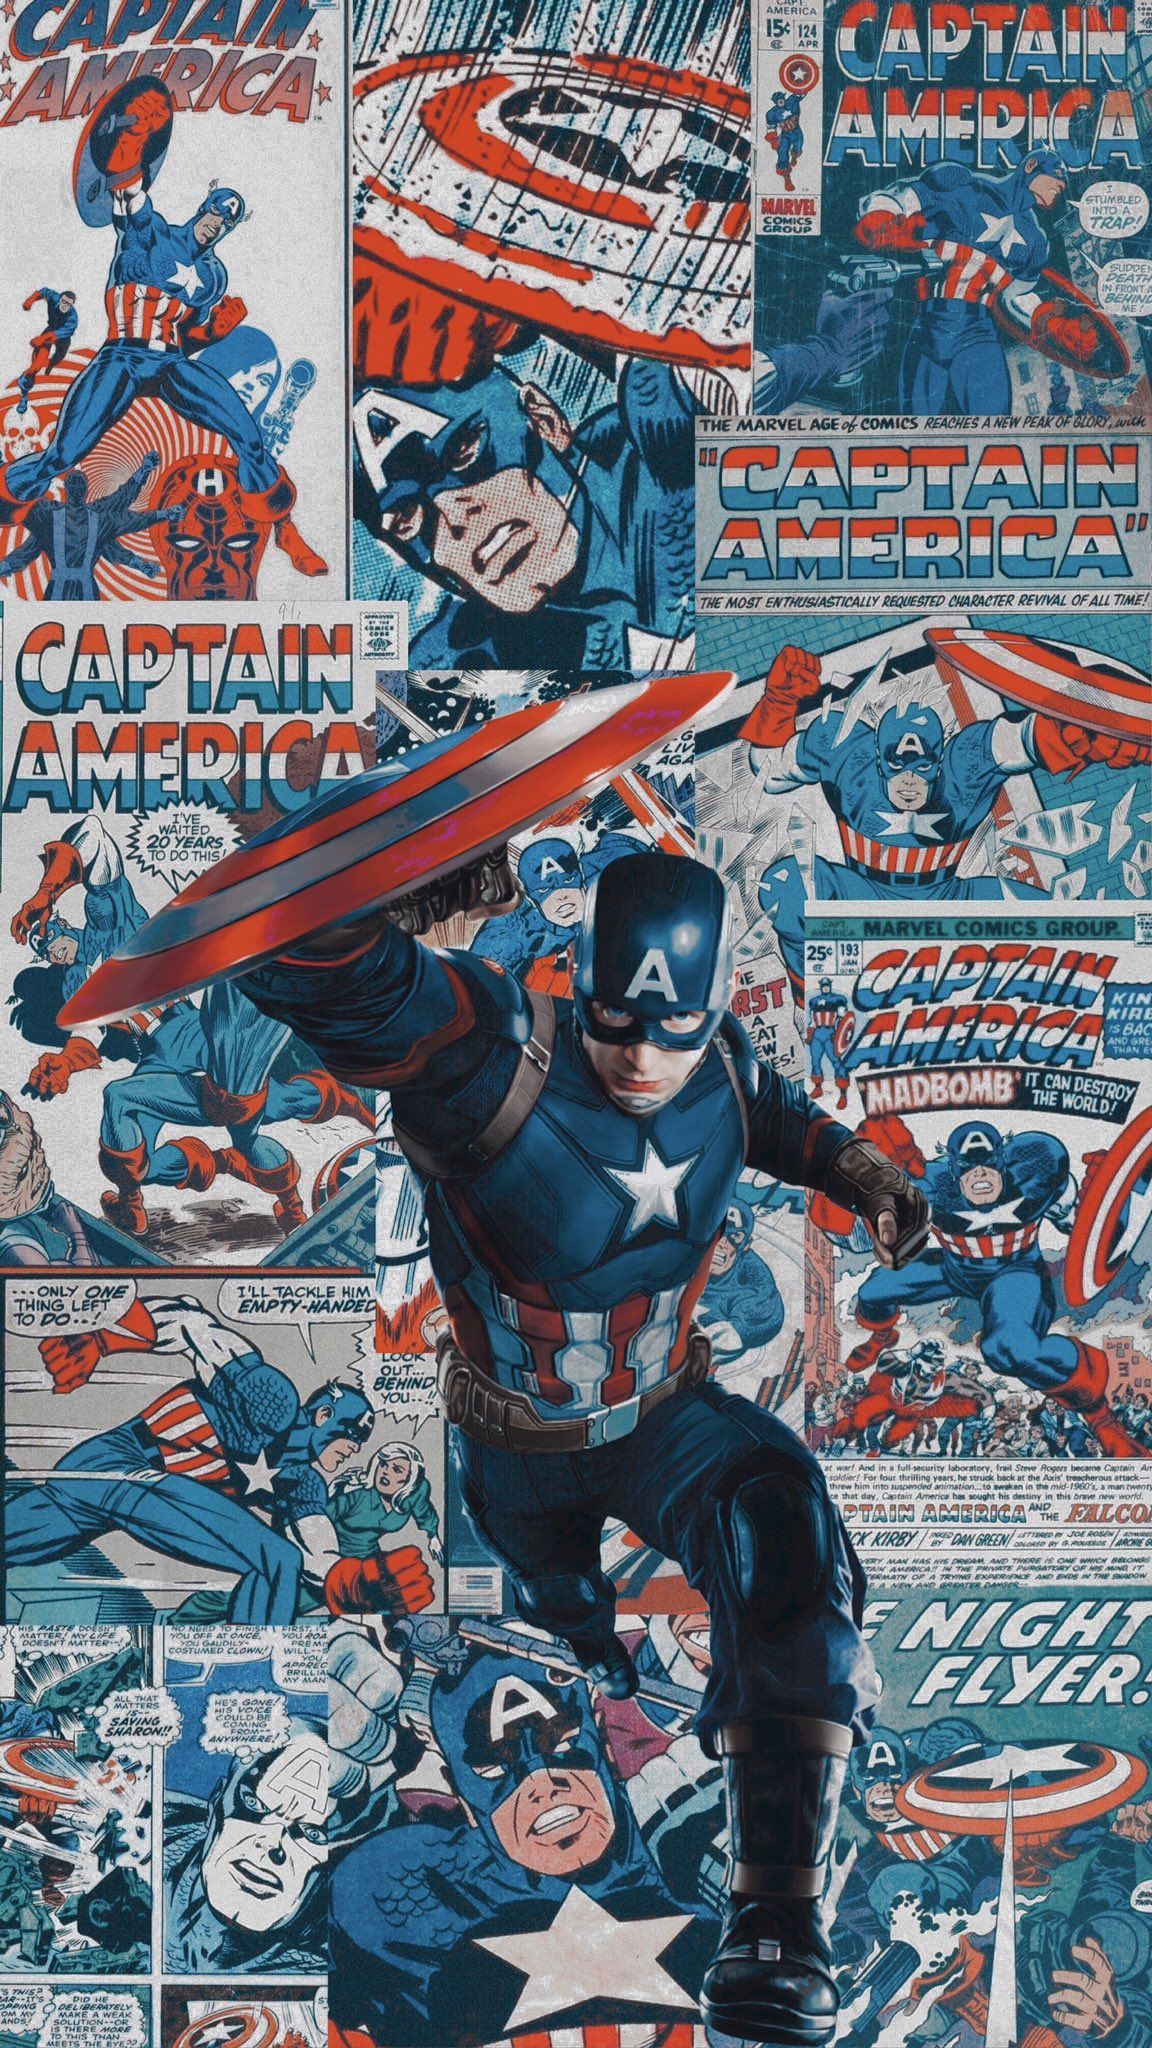 Captain America iPhone Wallpaper with high-resolution 1080x1920 pixel. You can use this wallpaper for your iPhone 5, 6, 7, 8, X, XS, XR backgrounds, Mobile Screensaver, or iPad Lock Screen - Captain America